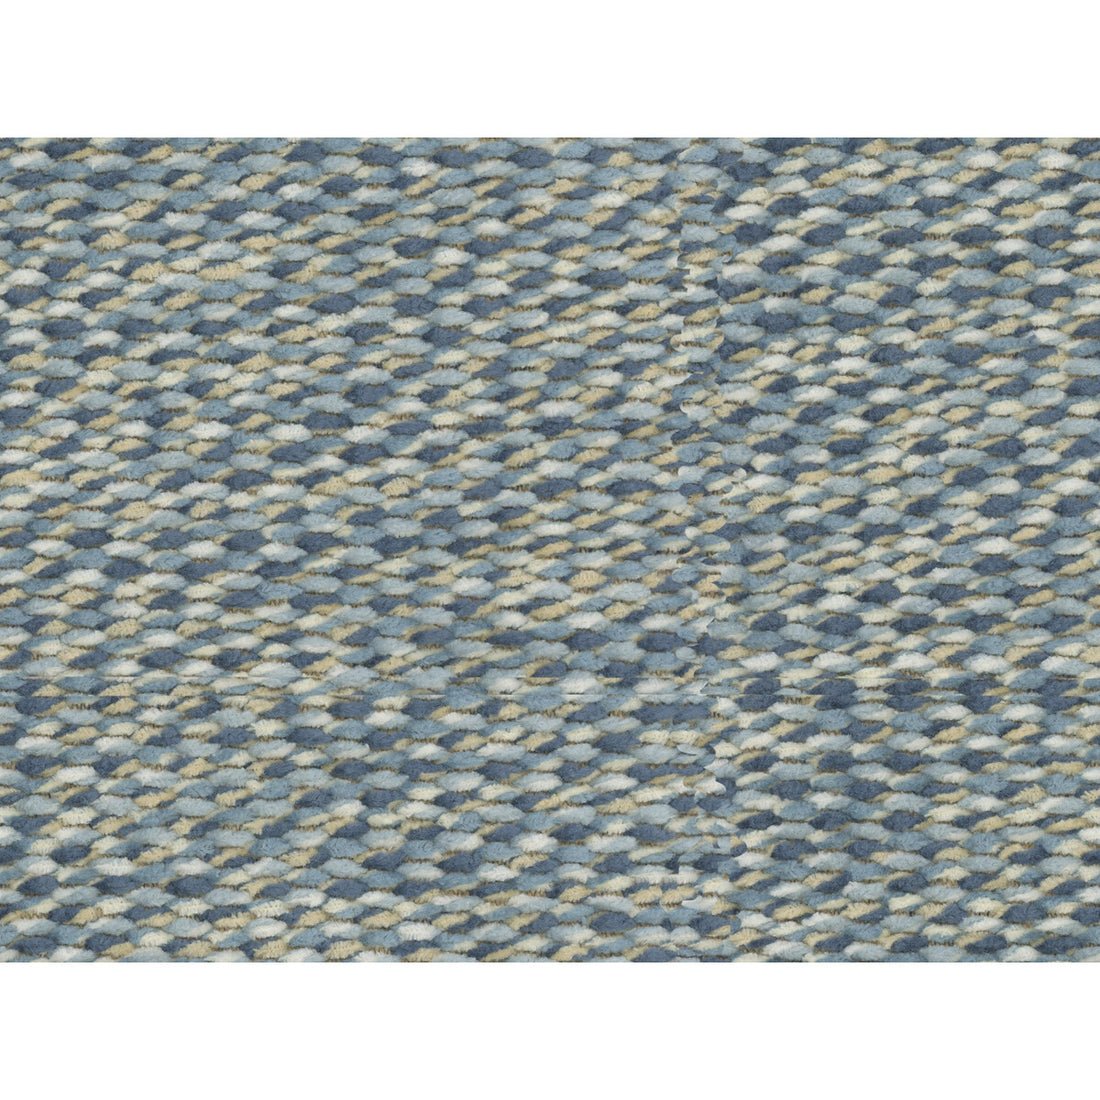 Aravis Chenille fabric in blue color - pattern 8016106.5.0 - by Brunschwig &amp; Fils in the Chambery Textures collection